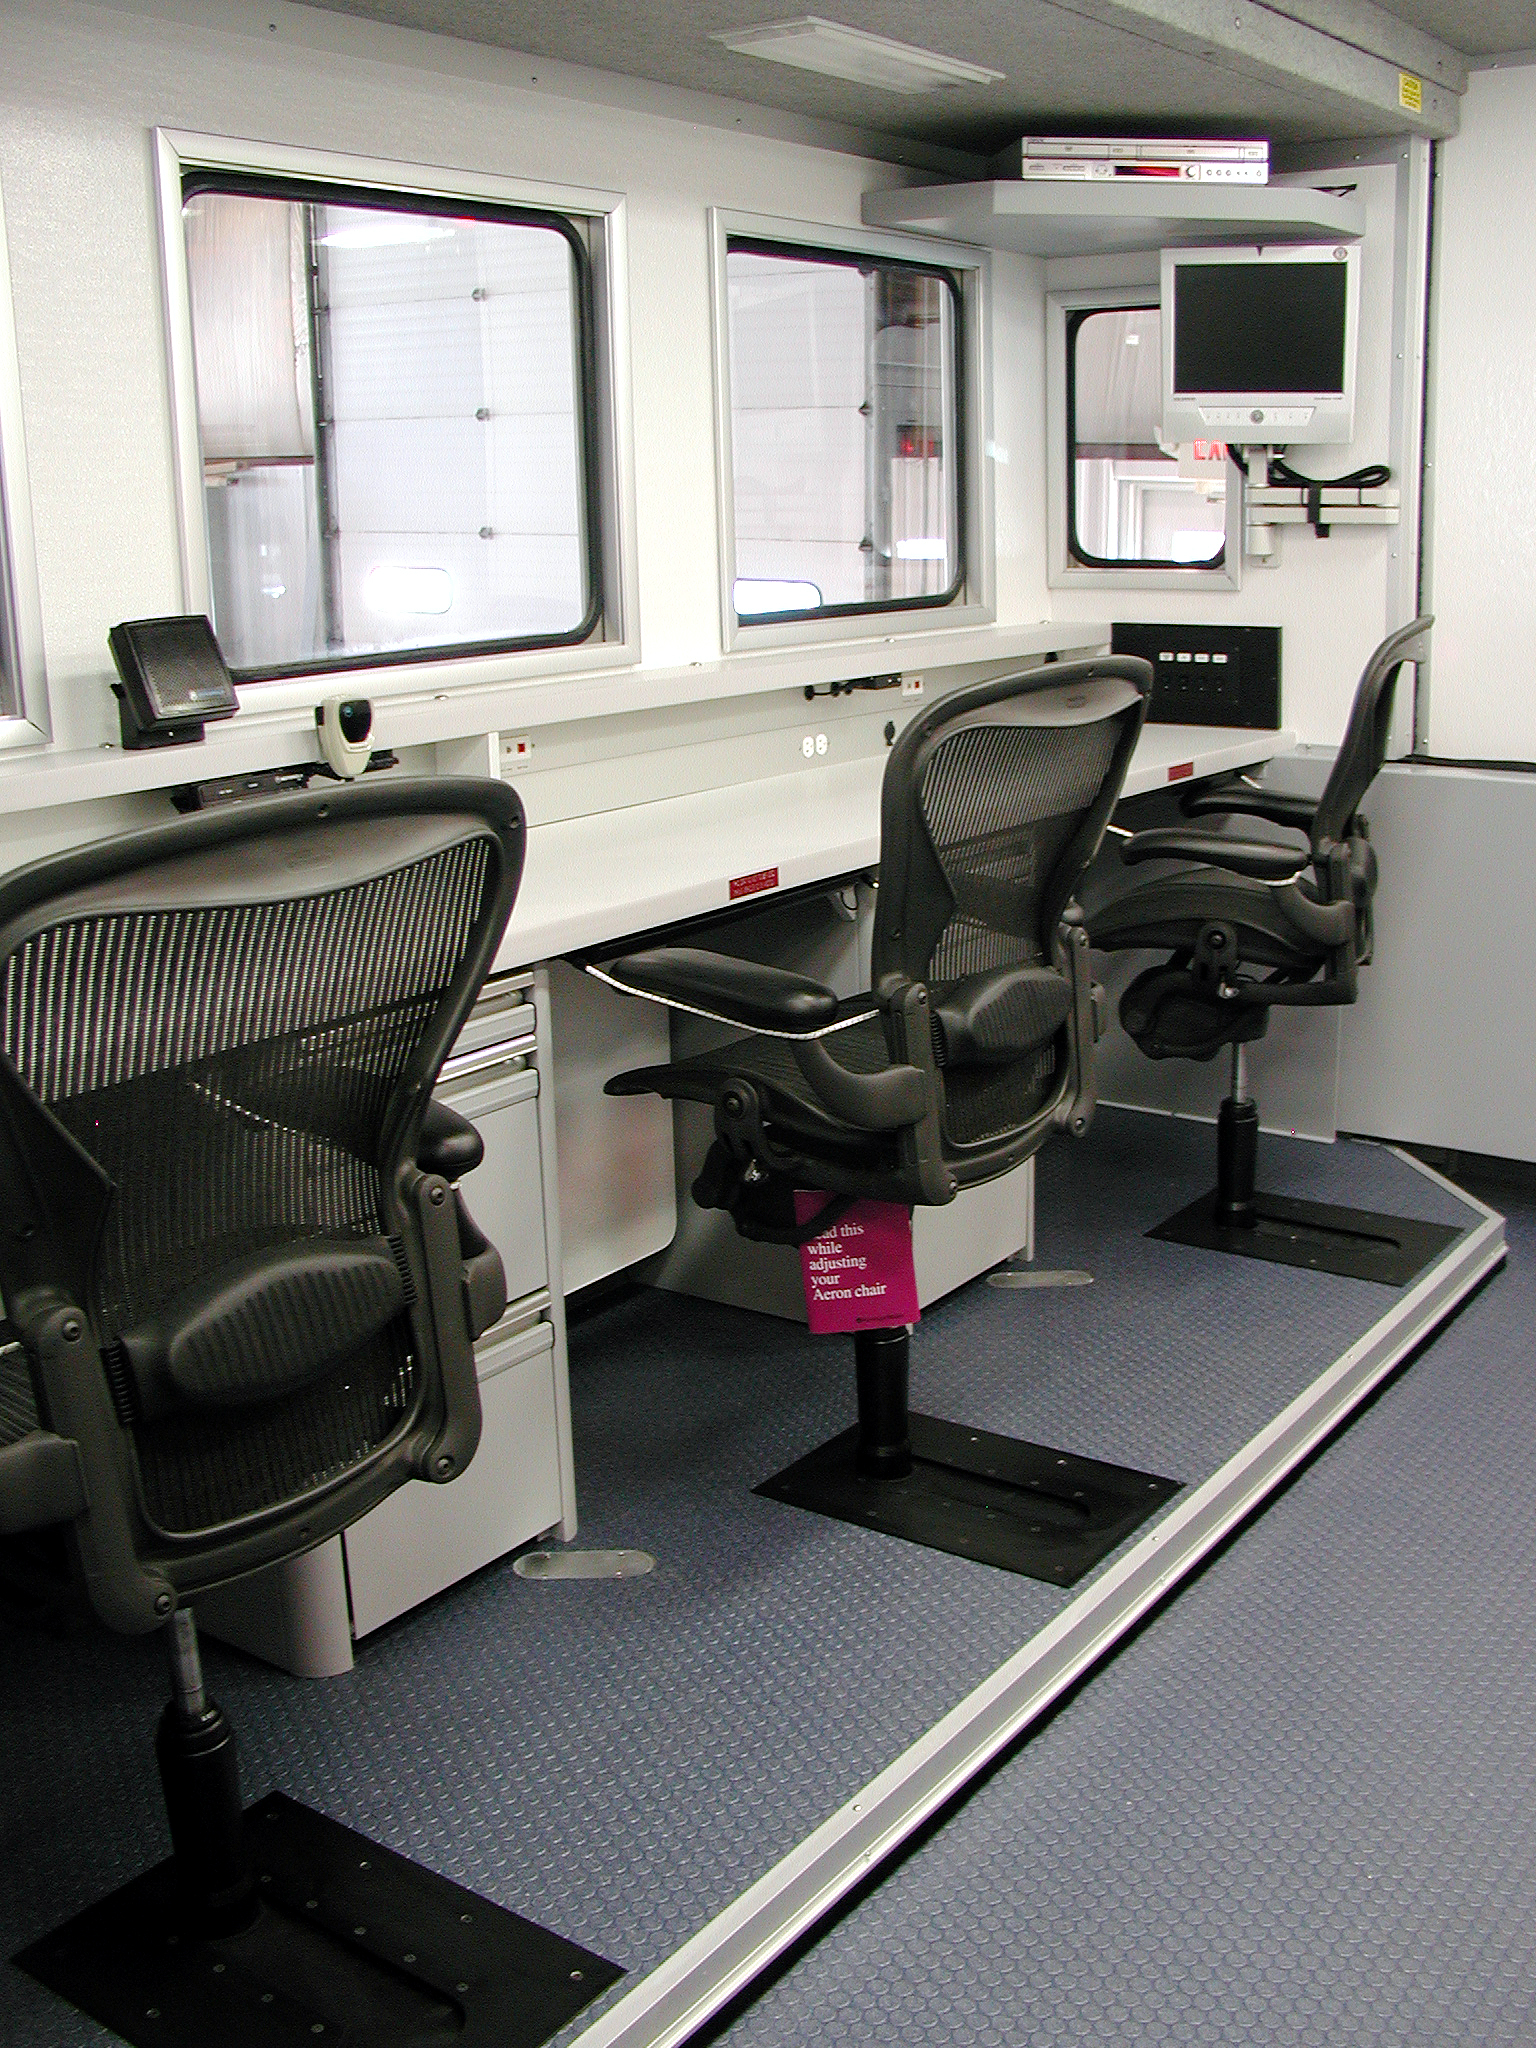 Workstation with three office chairs in a row that are equipped with Valid's adjustable chair slides.